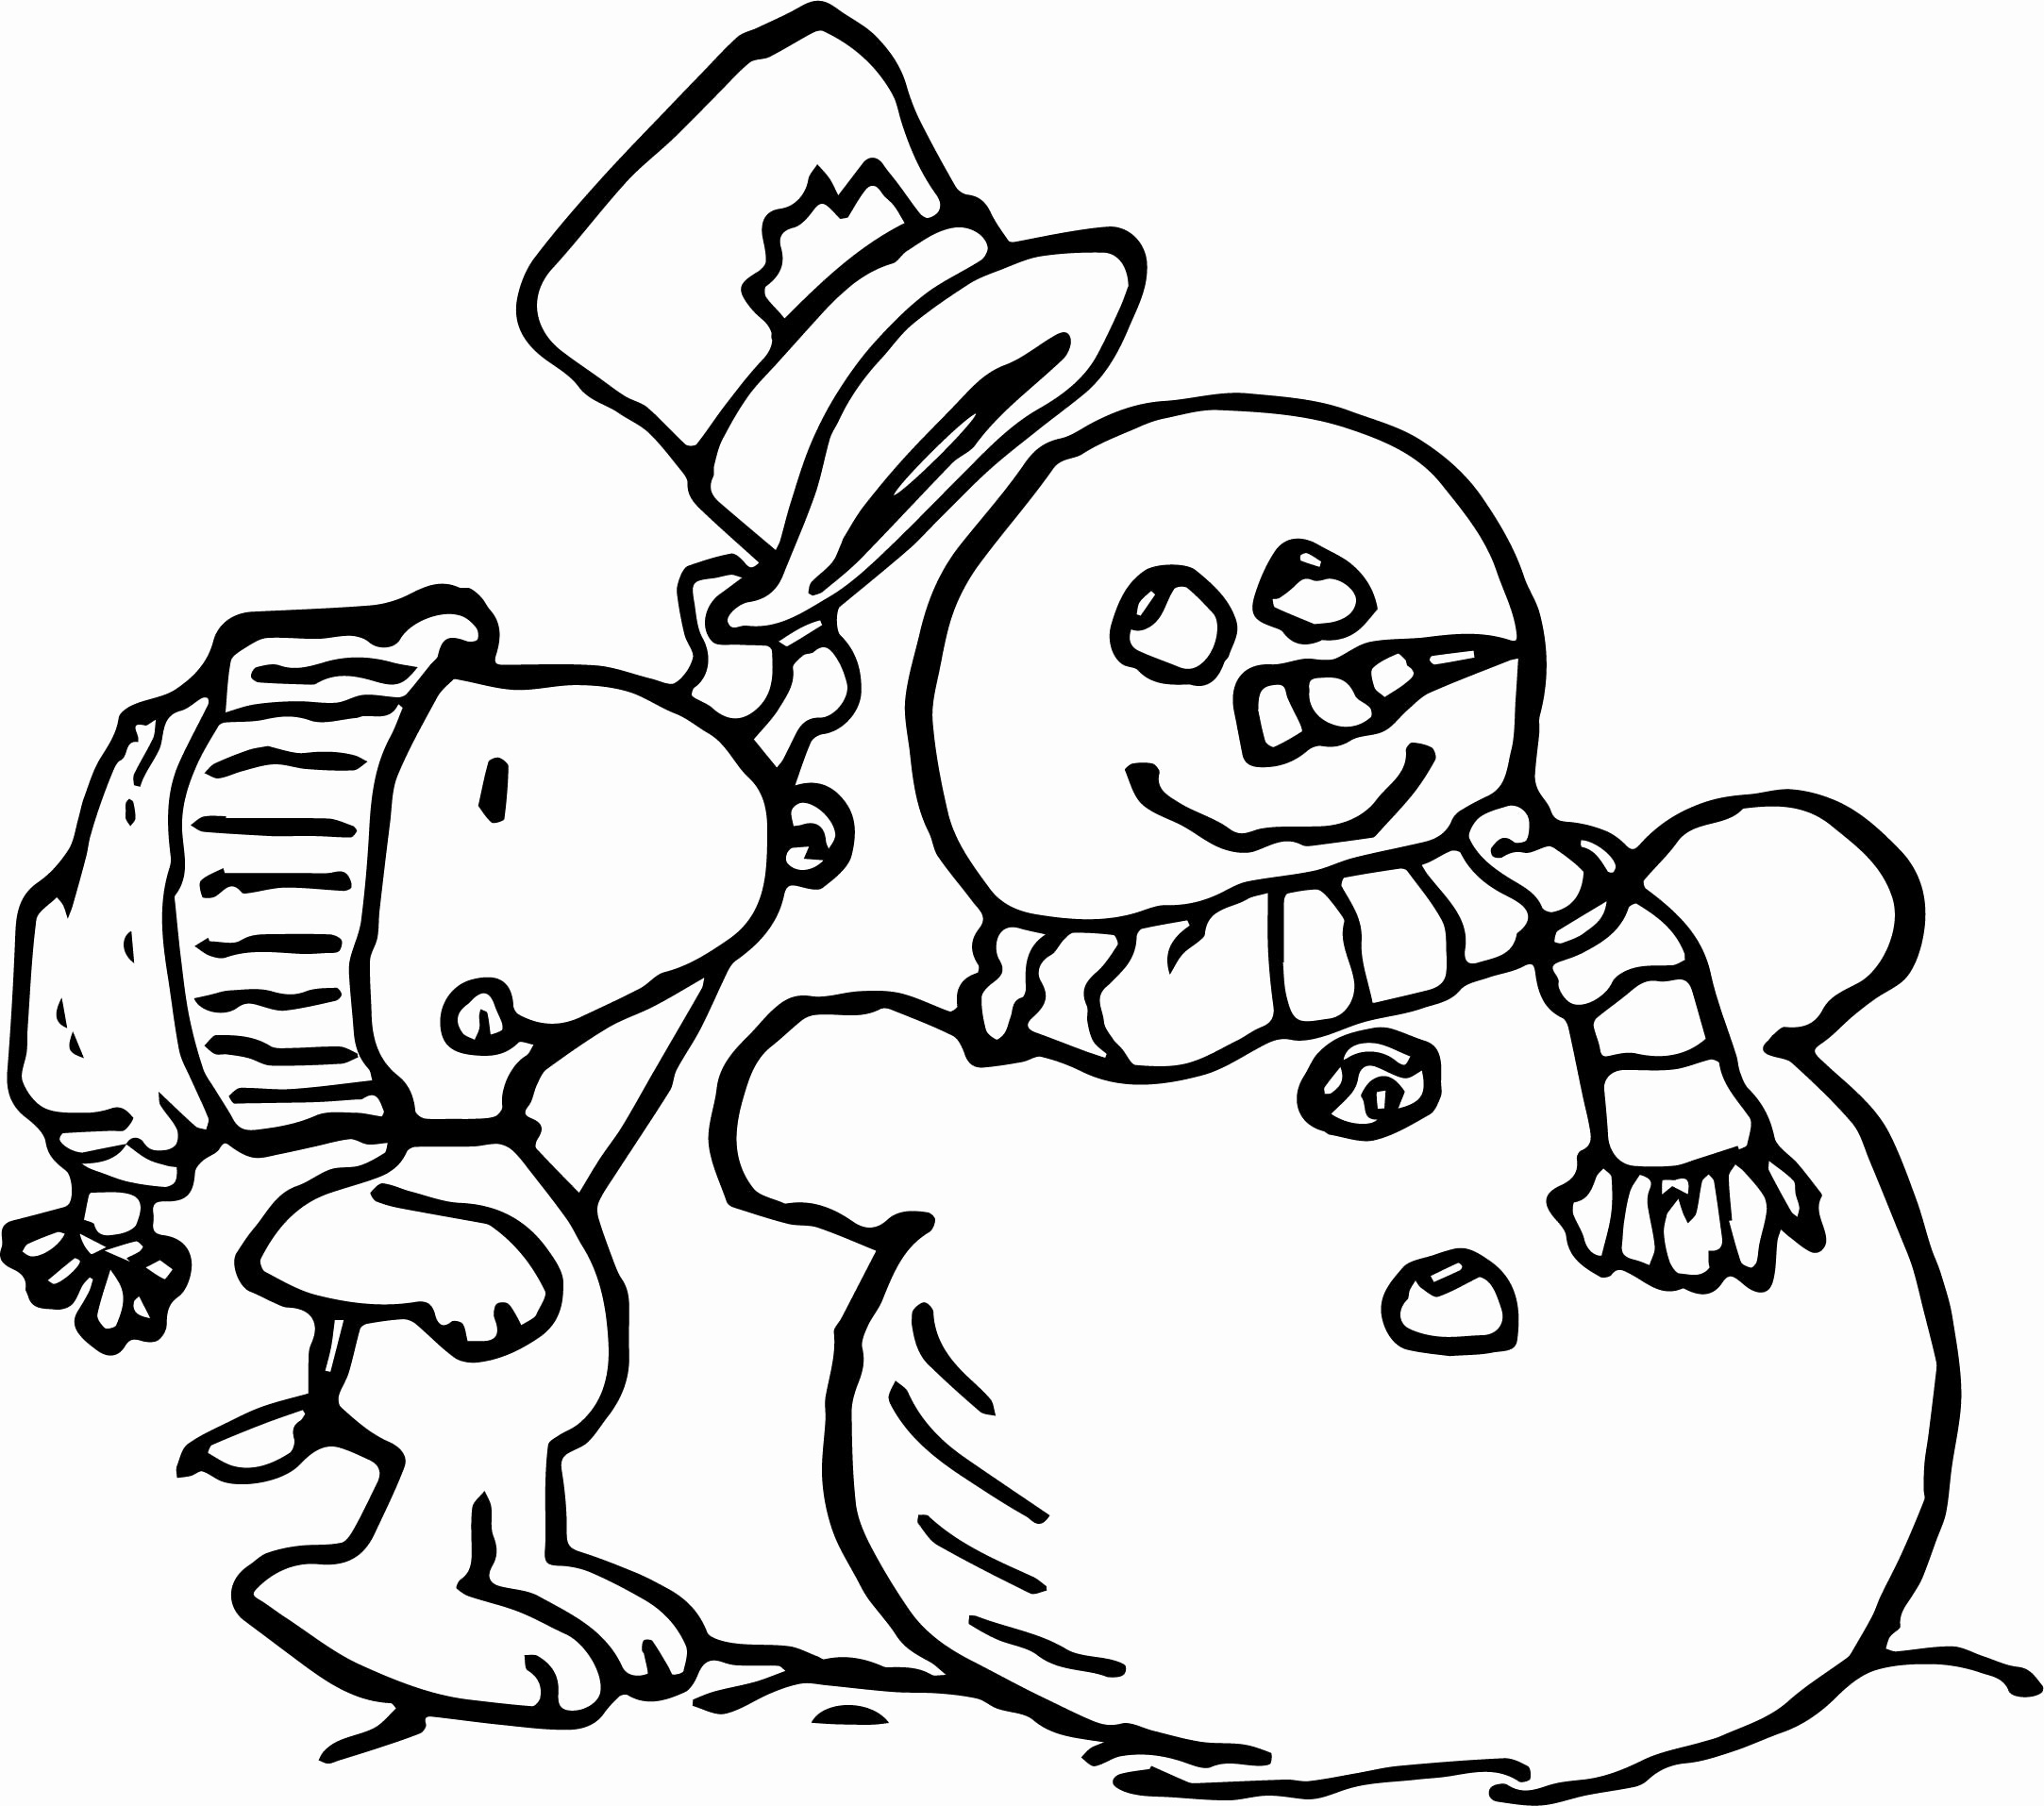 Snow Day Coloring Page At GetColorings Free Printable Colorings 